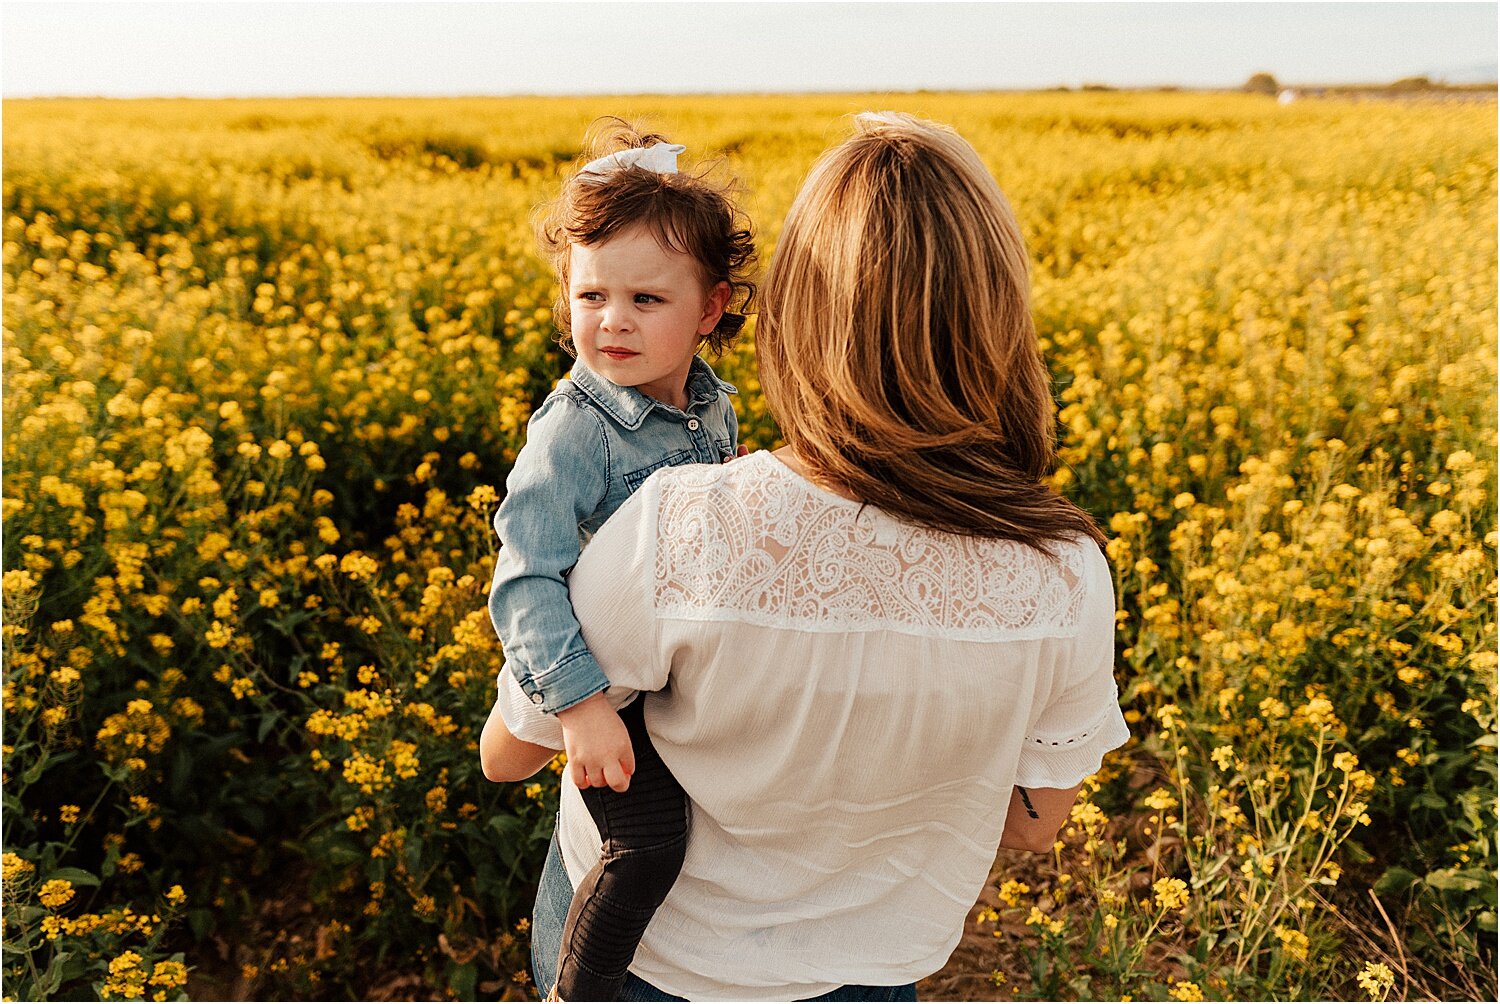 spring field of yellow flowers family session25.jpg